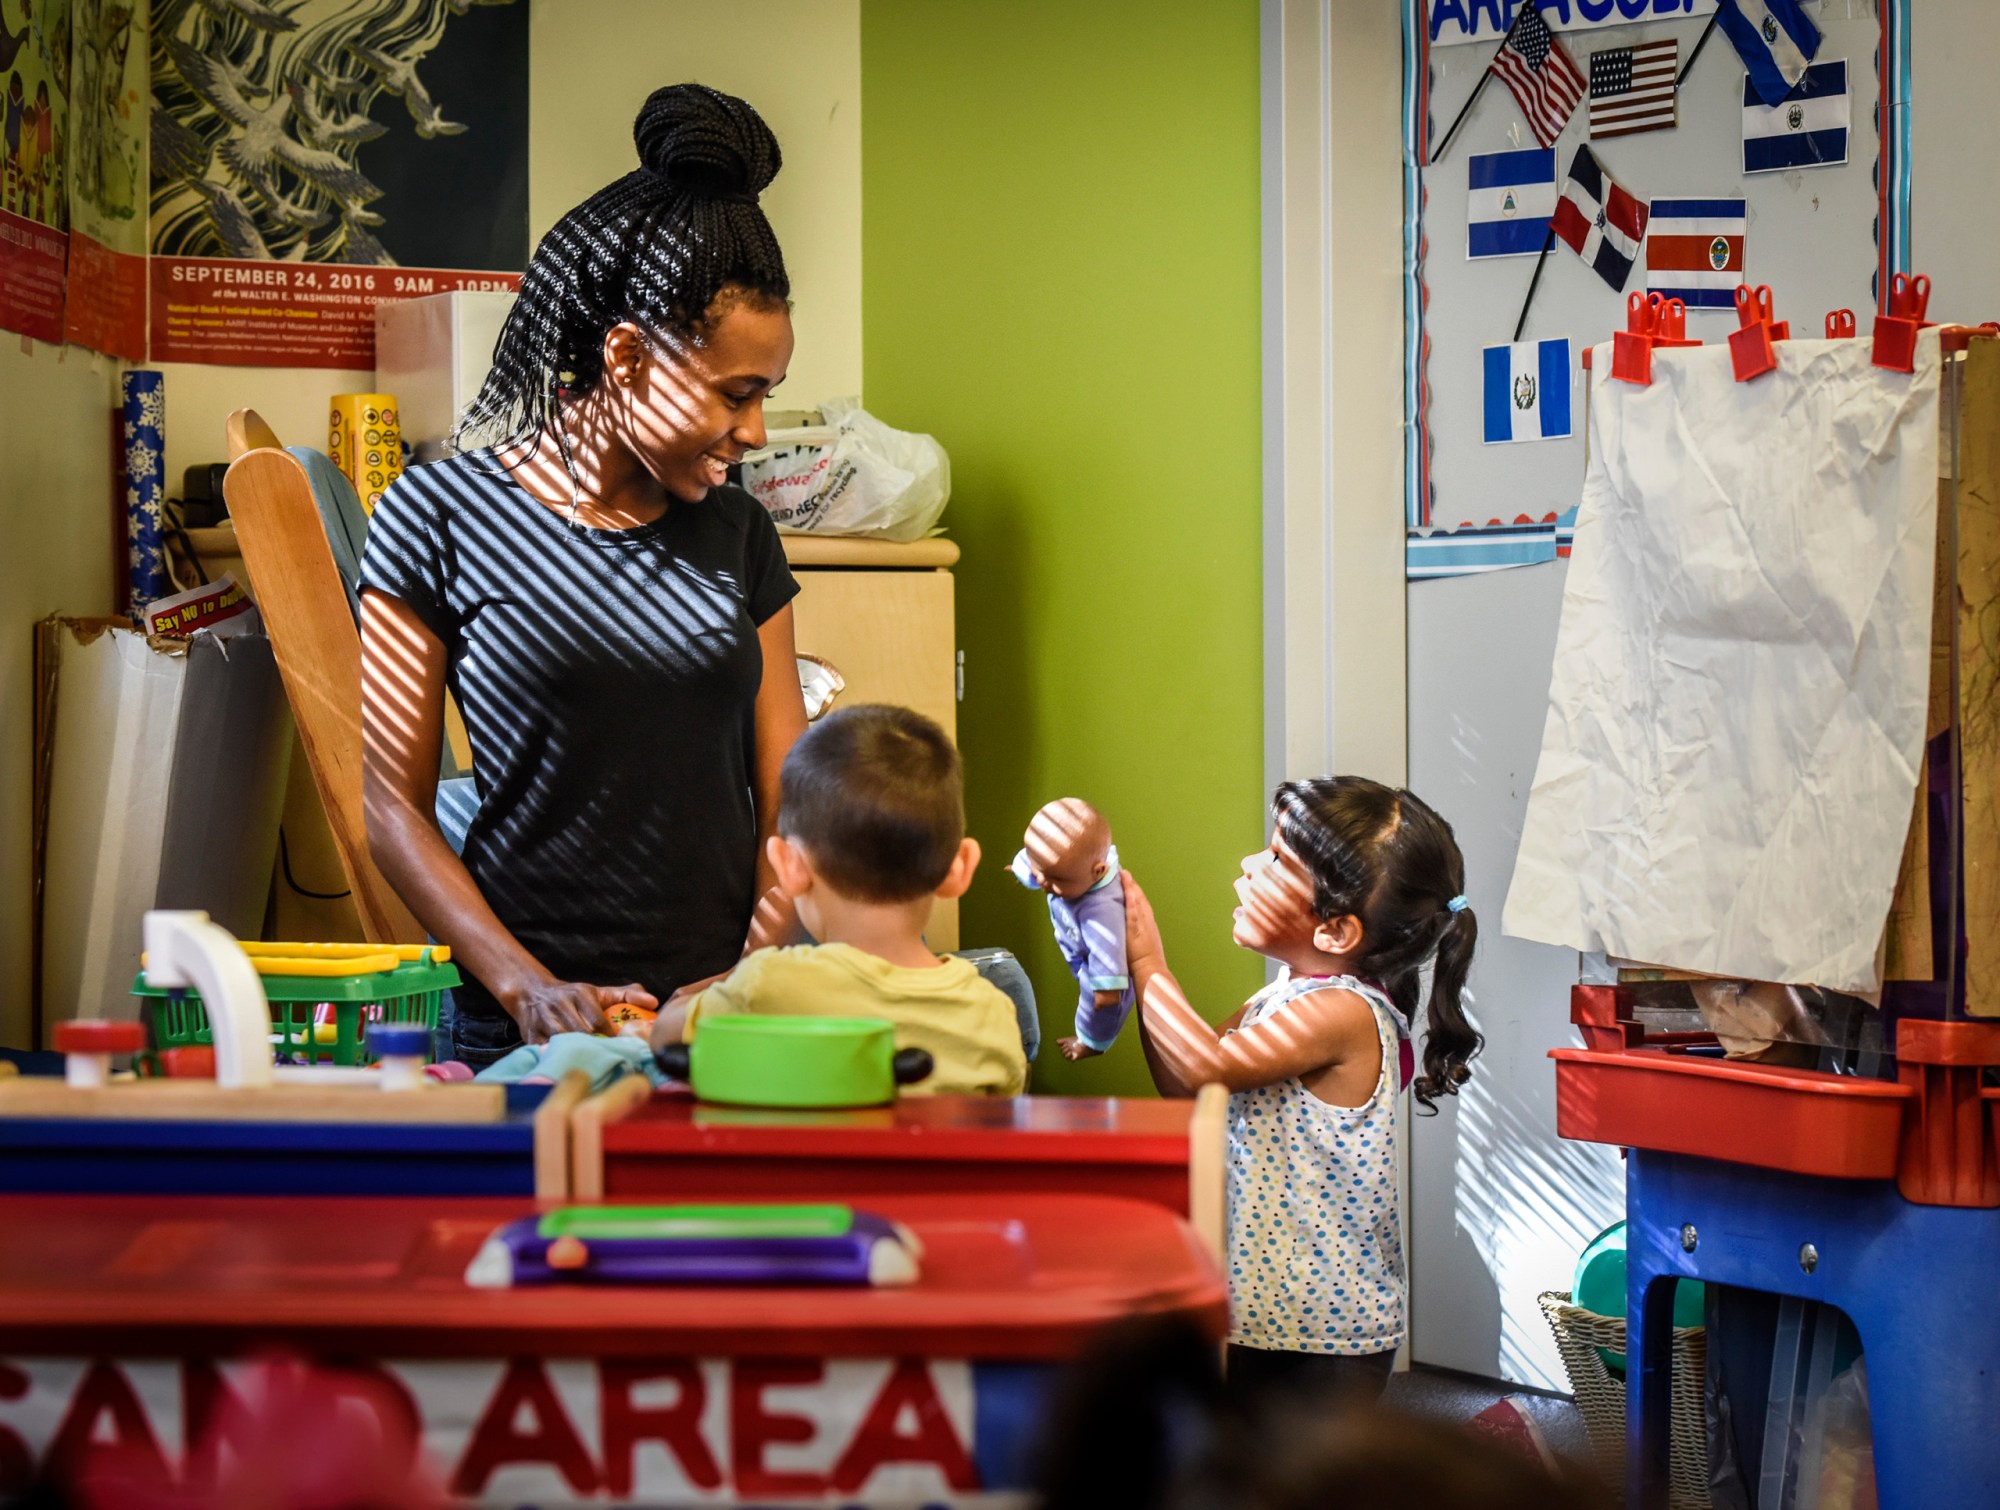 Tyonna Stinnie, left, works toward her certification at a Child Development Center training for potential child care workers in Washington, D.C.. (Getty/ Bill O'Leary)